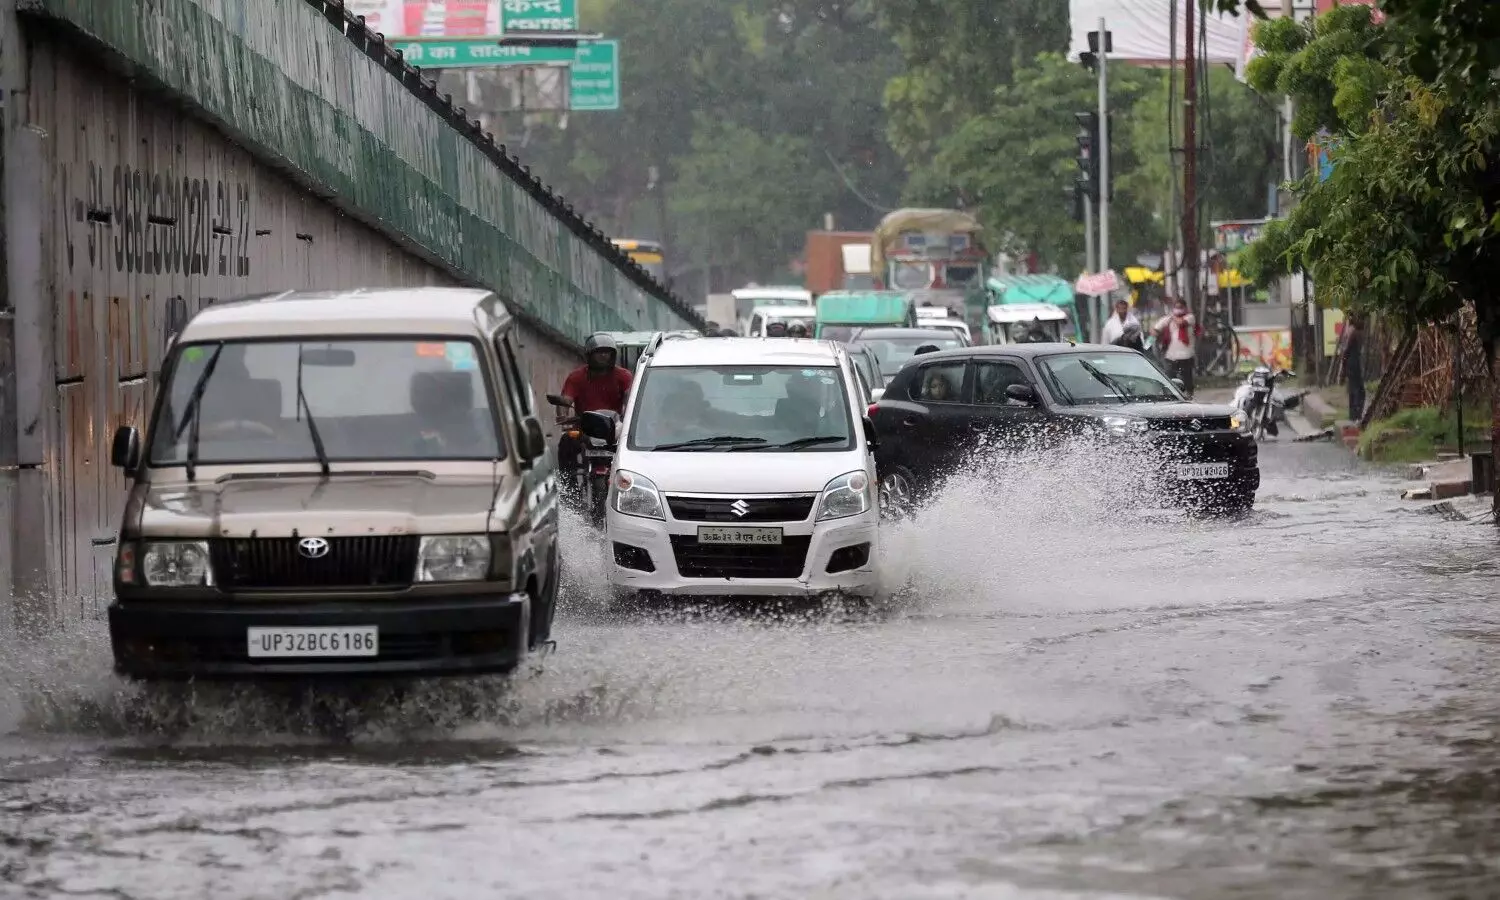 Monsoon Update: IMD predicts heavy rainfall, thunderstorm over east-central India, other parts - Check complete forecast here